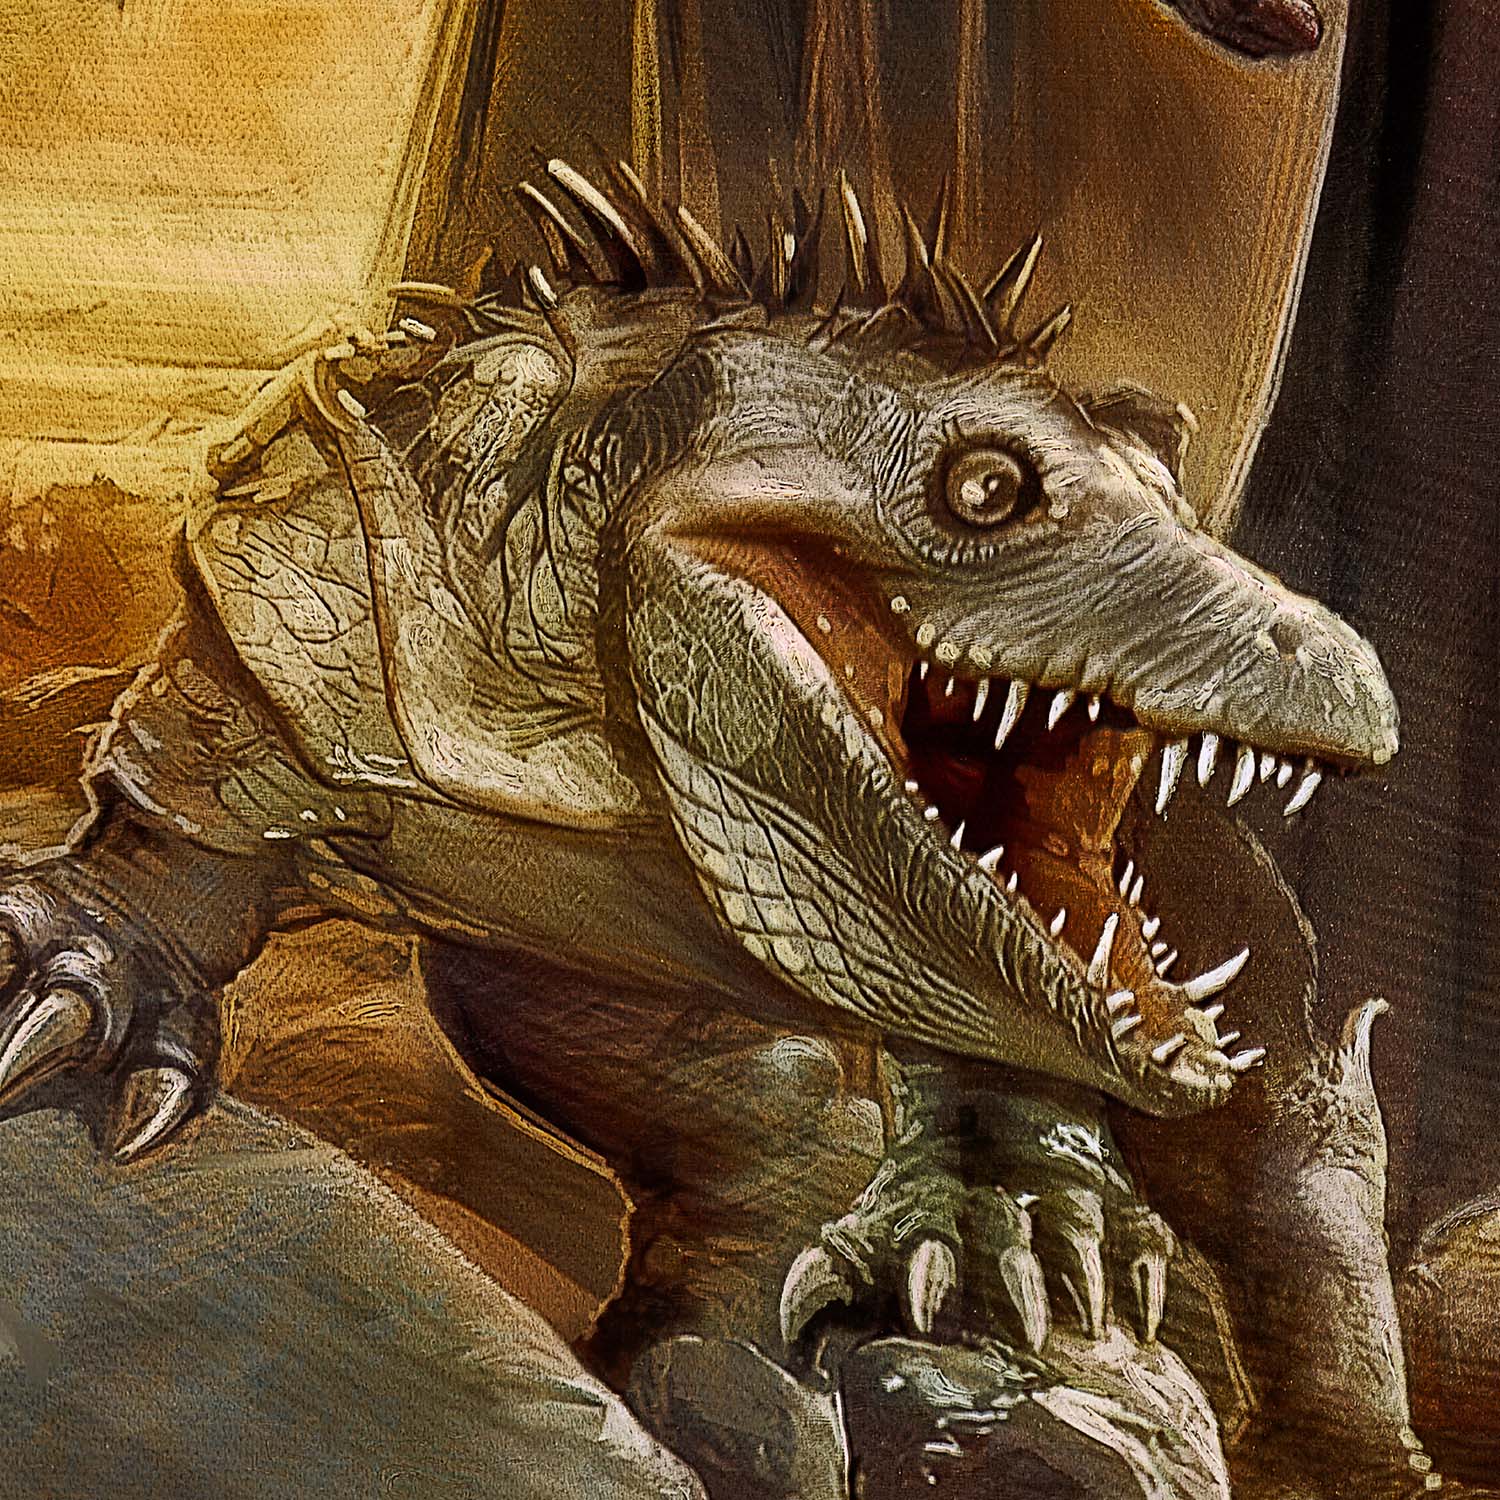 The massiff™, a reptilian species of dog-like hunters, were domesticated for sentry and guard tasks. Closeup